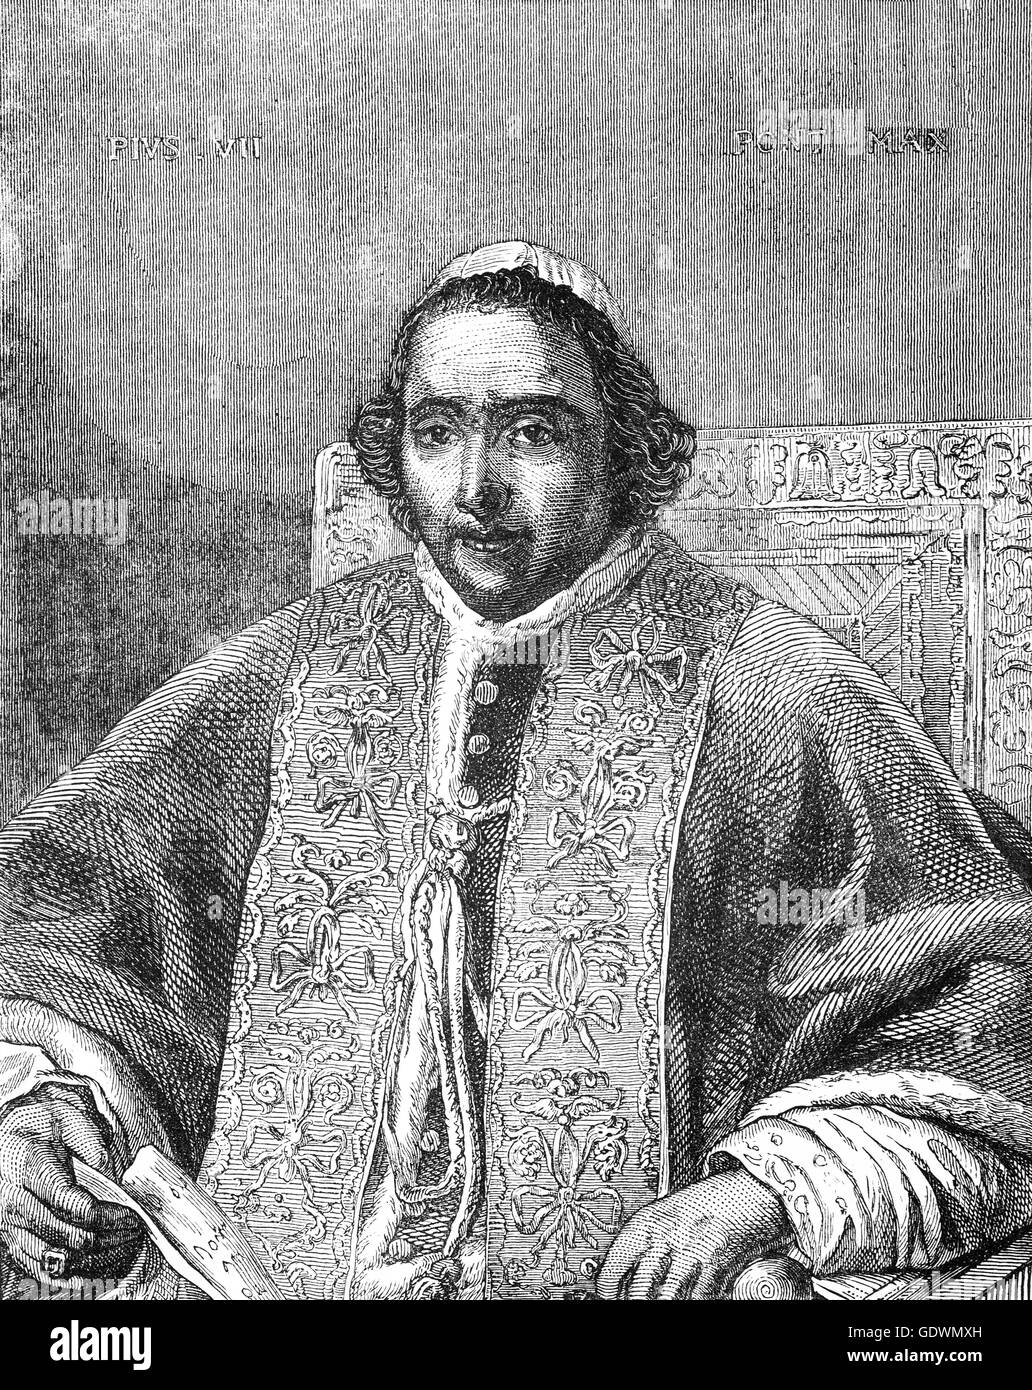 Pope Pius VIII (1761 – 1830), born Francesco Saverio Castiglioni, reigned as Pope from 31 March 1829 to his death in 1830. His pontificate was the shortest of all the popes of the 19th century.  He refused to swear allegiance to Napoleon and was taken to a series of Italian cities before being sent to France. After Napoleon fell, he returned to his diocese in Ascoli Piceno  in 1814. Stock Photo